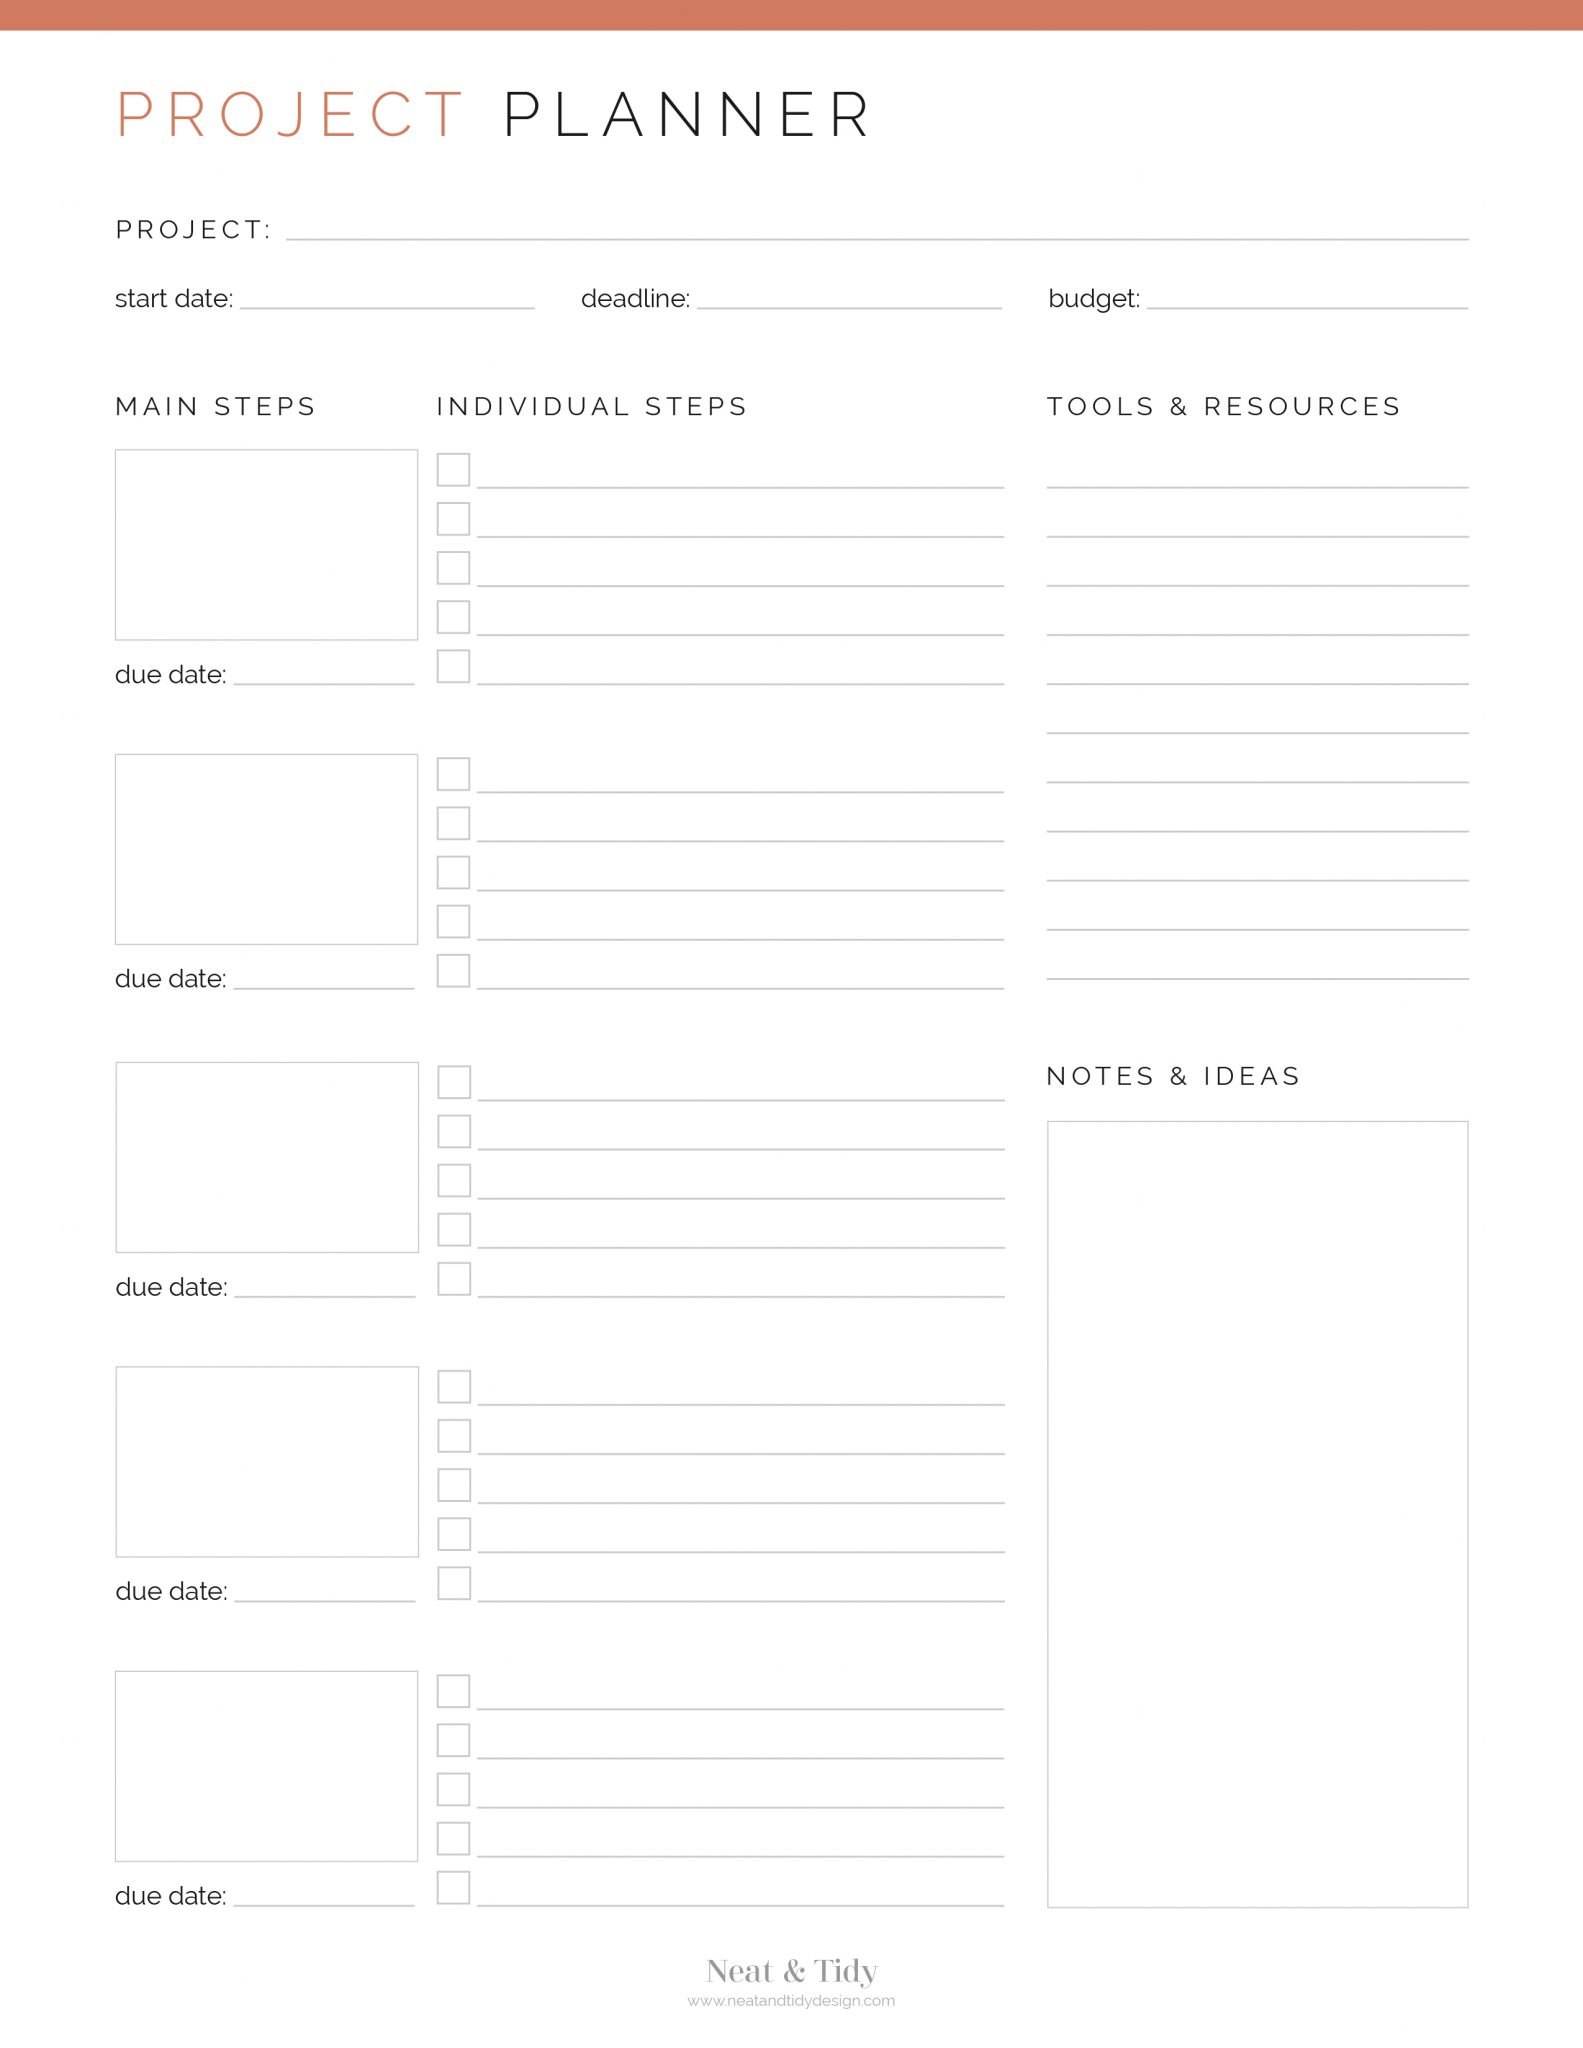 Project Planner - Neat and Tidy Design